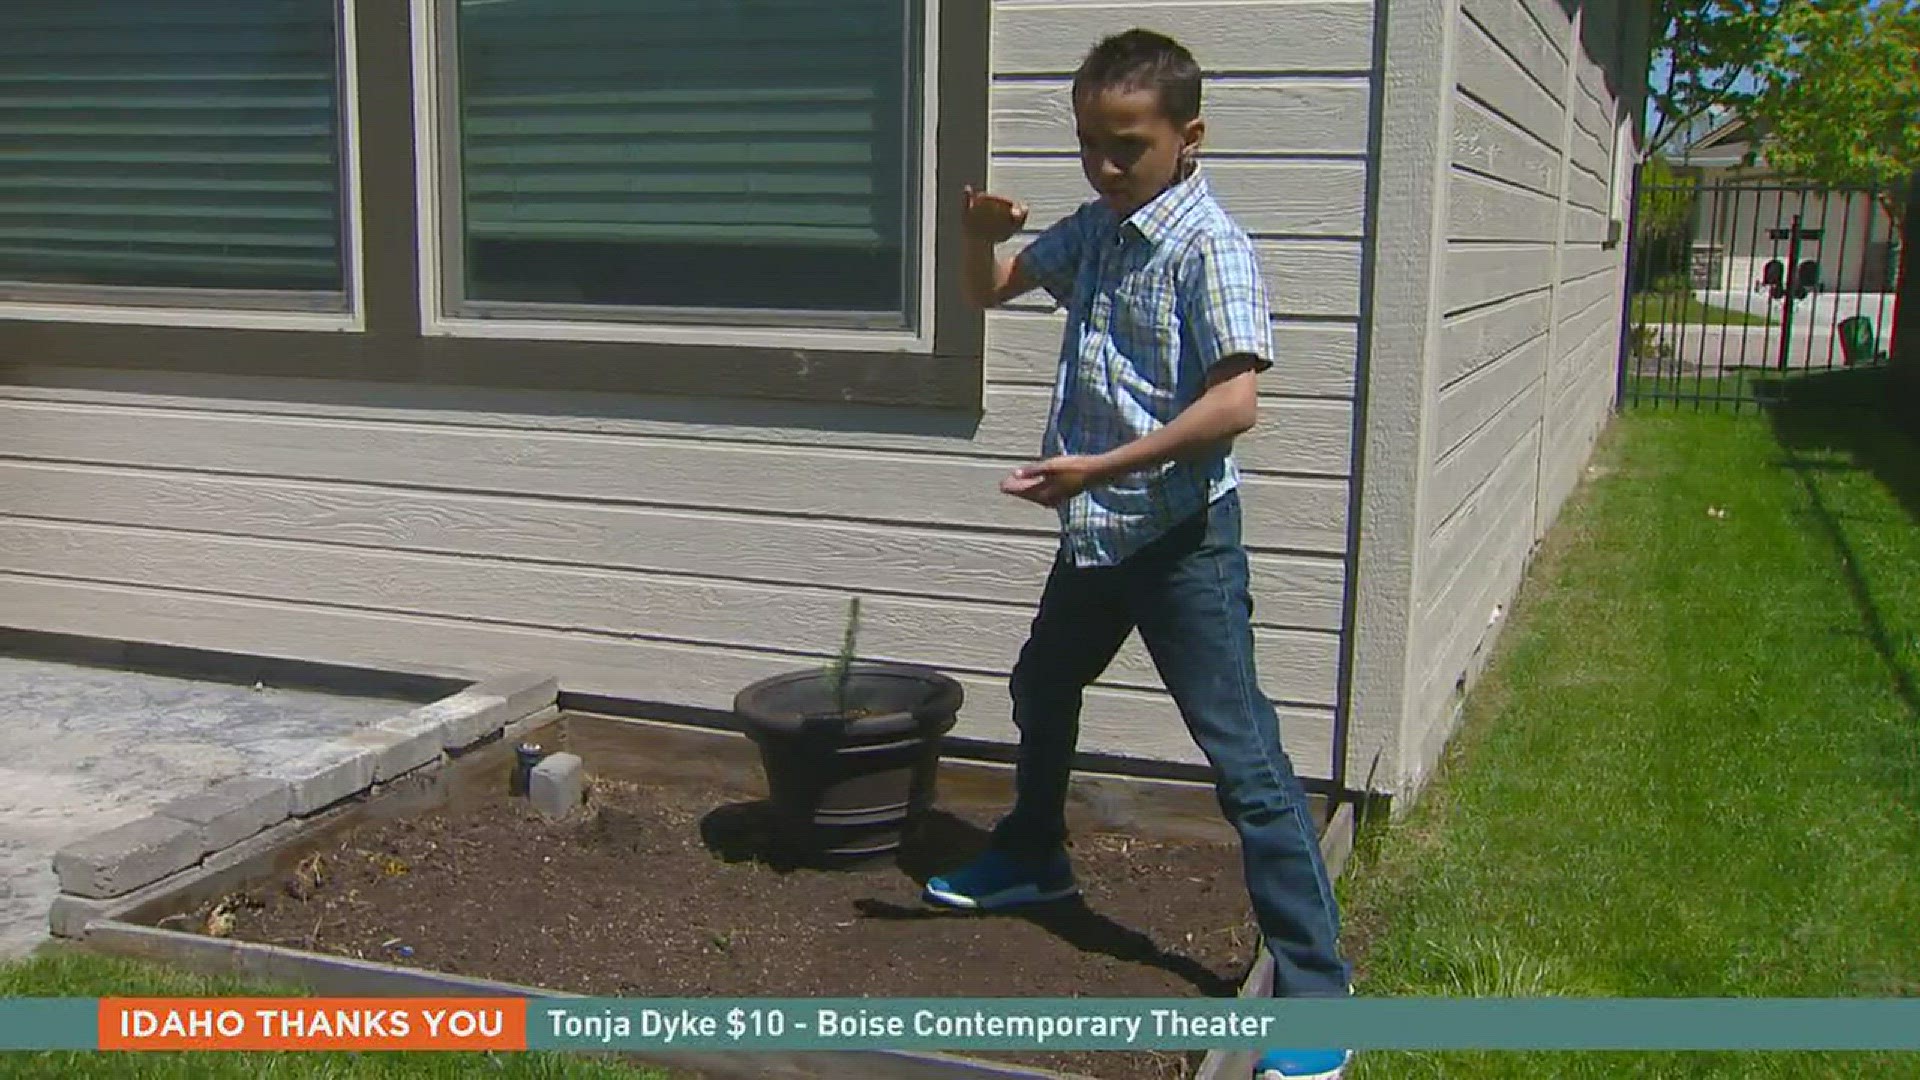 Jim Duthie introduces us to Hayden who grew very big cabbage.